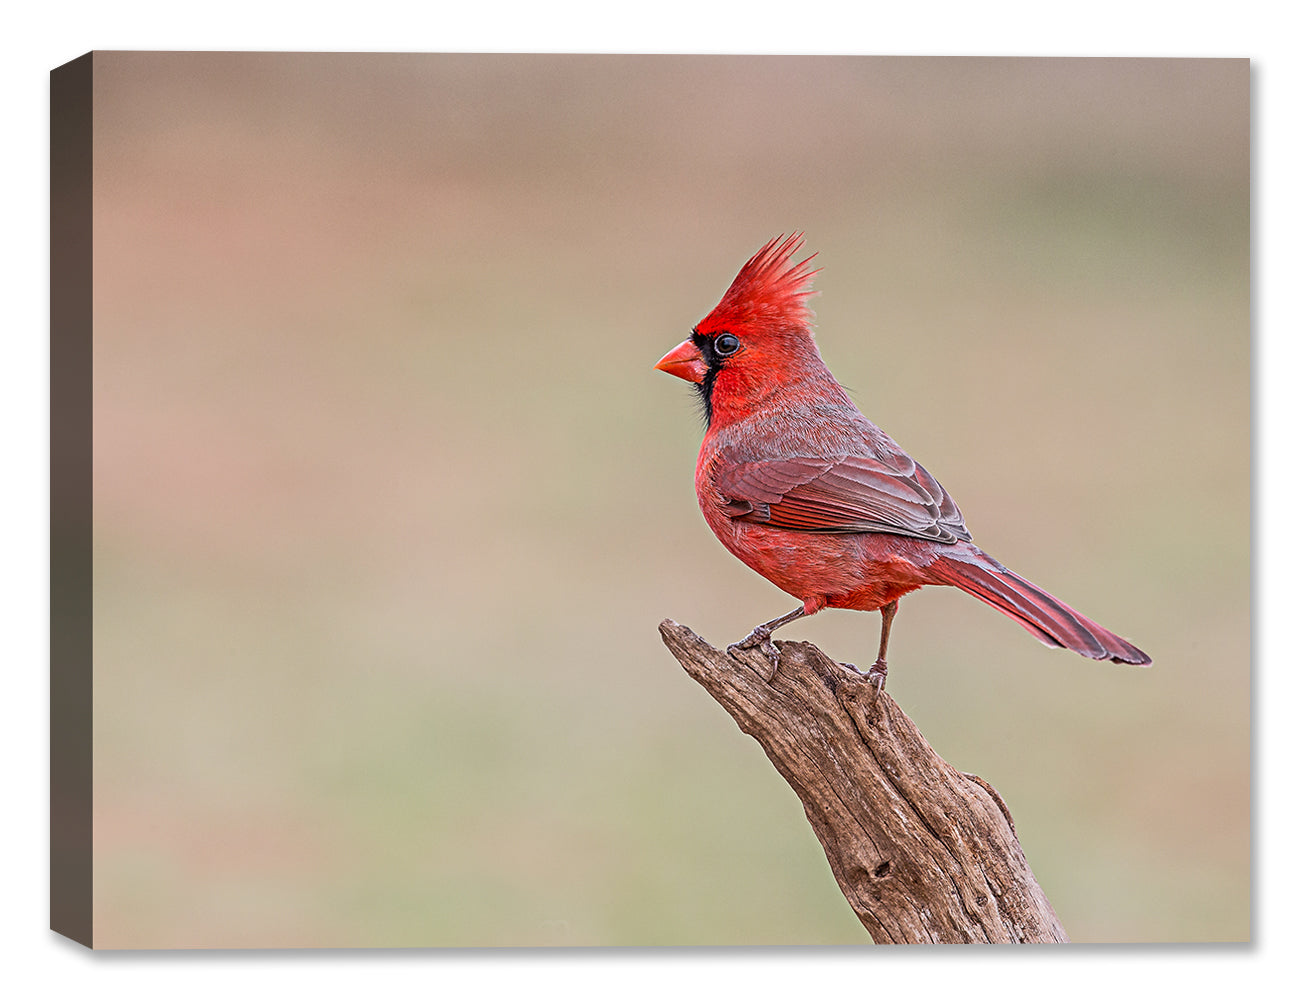 Cardinal Perched on a Branch - Photograph